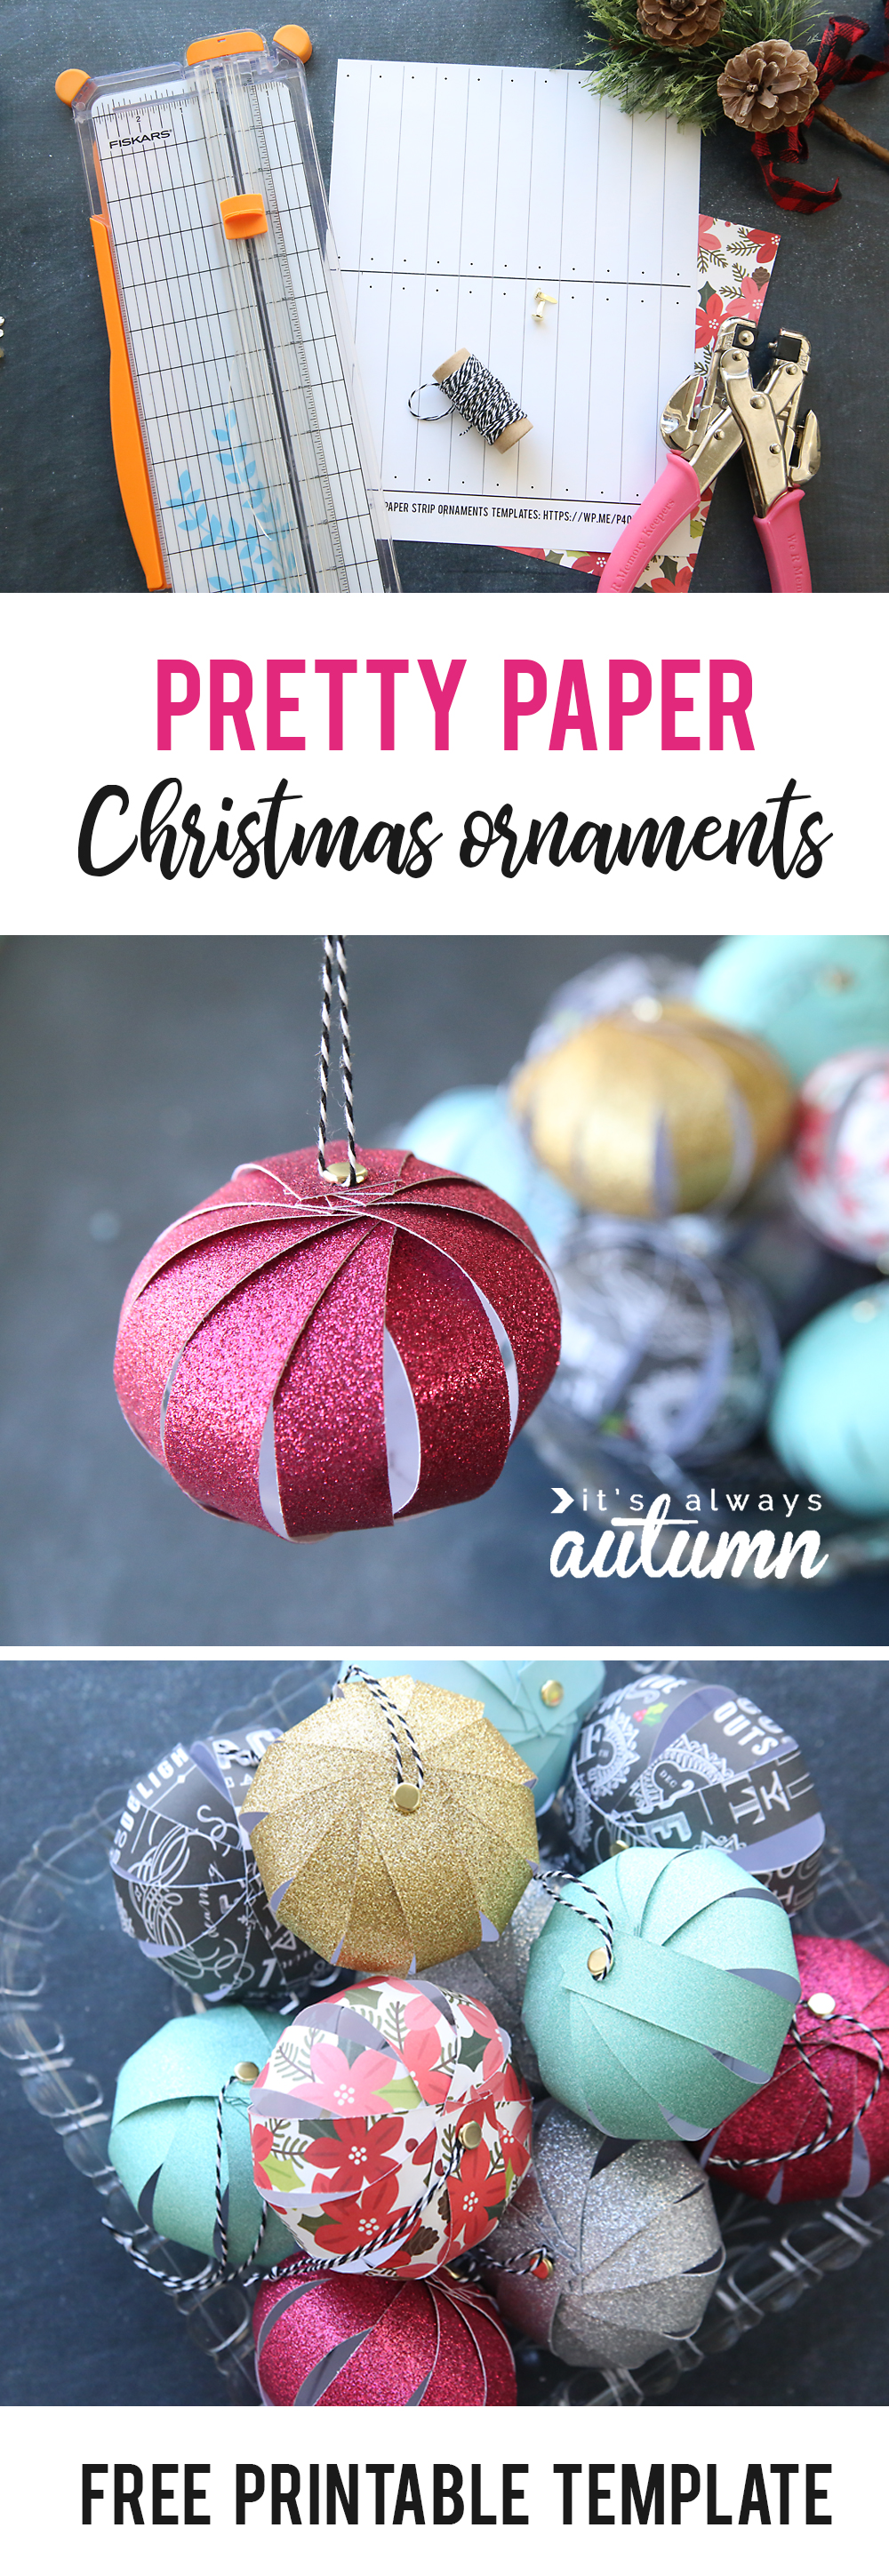 Fill the Ball: Kid-Made Christmas Ornaments